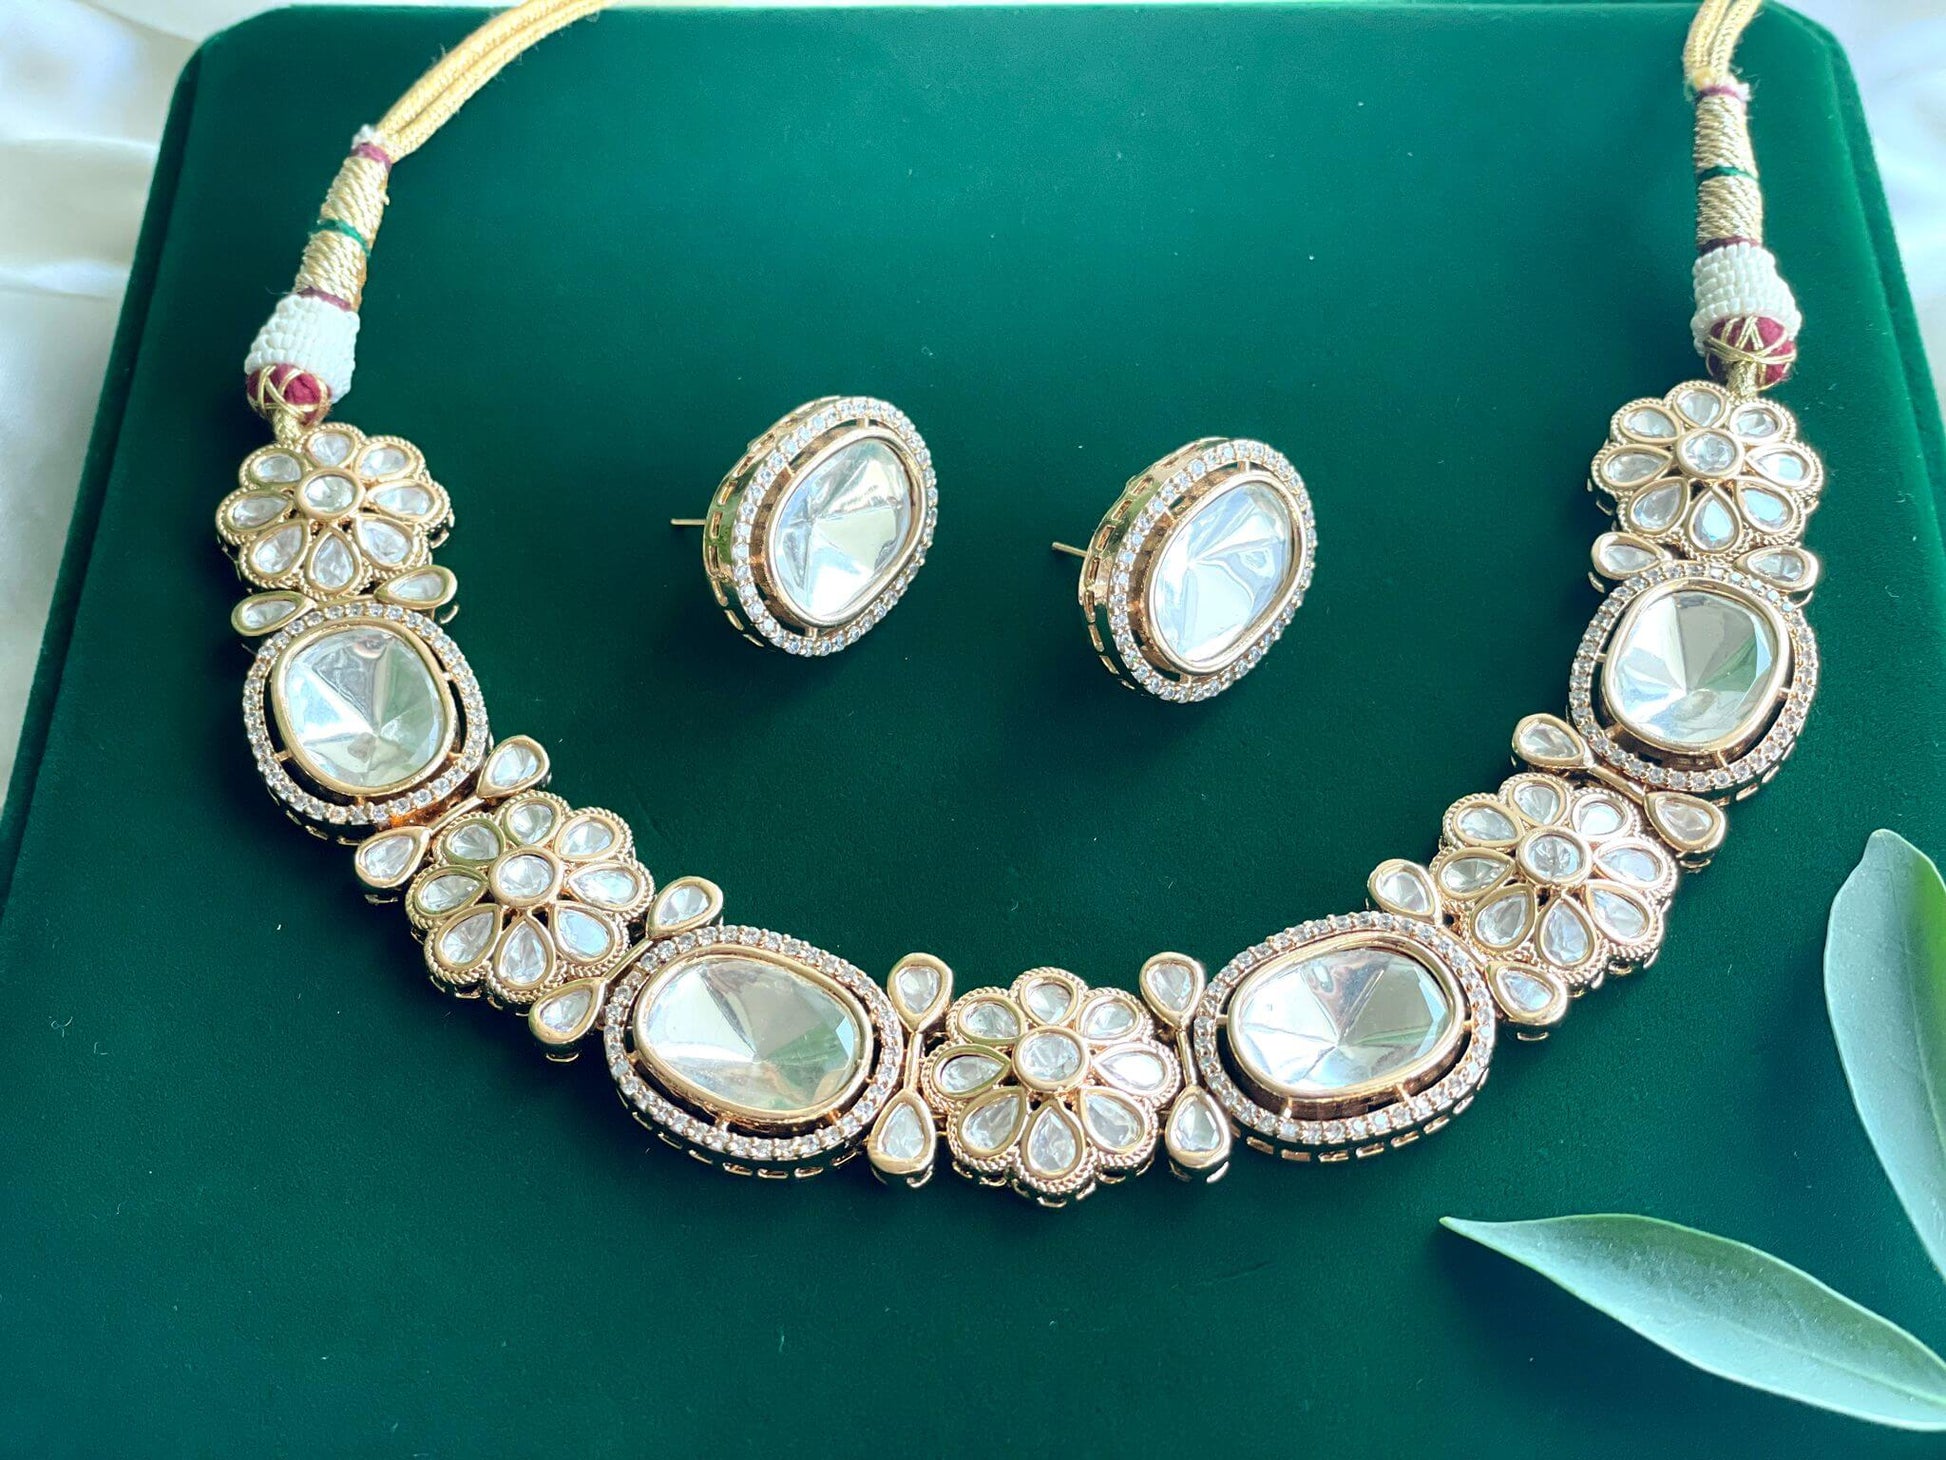 A beautiful necklace with pair of earrings